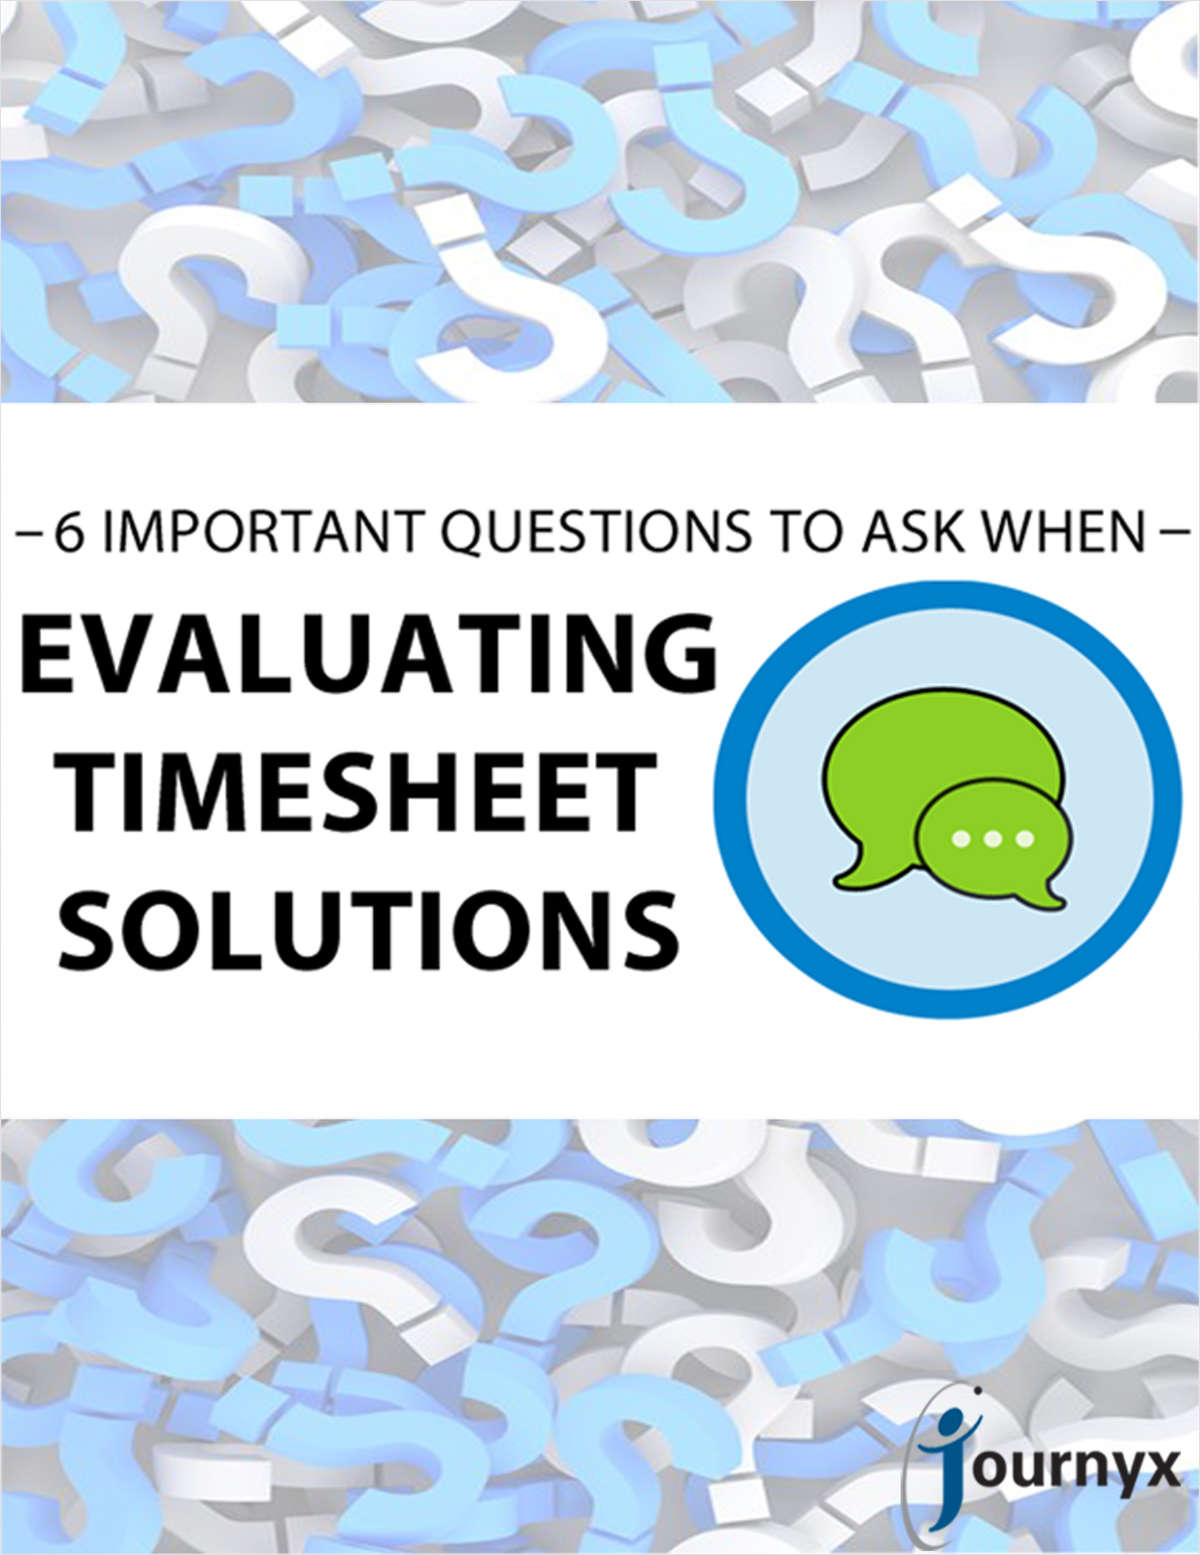 Six Important Questions to Ask When Evaluating Timesheet Solutions